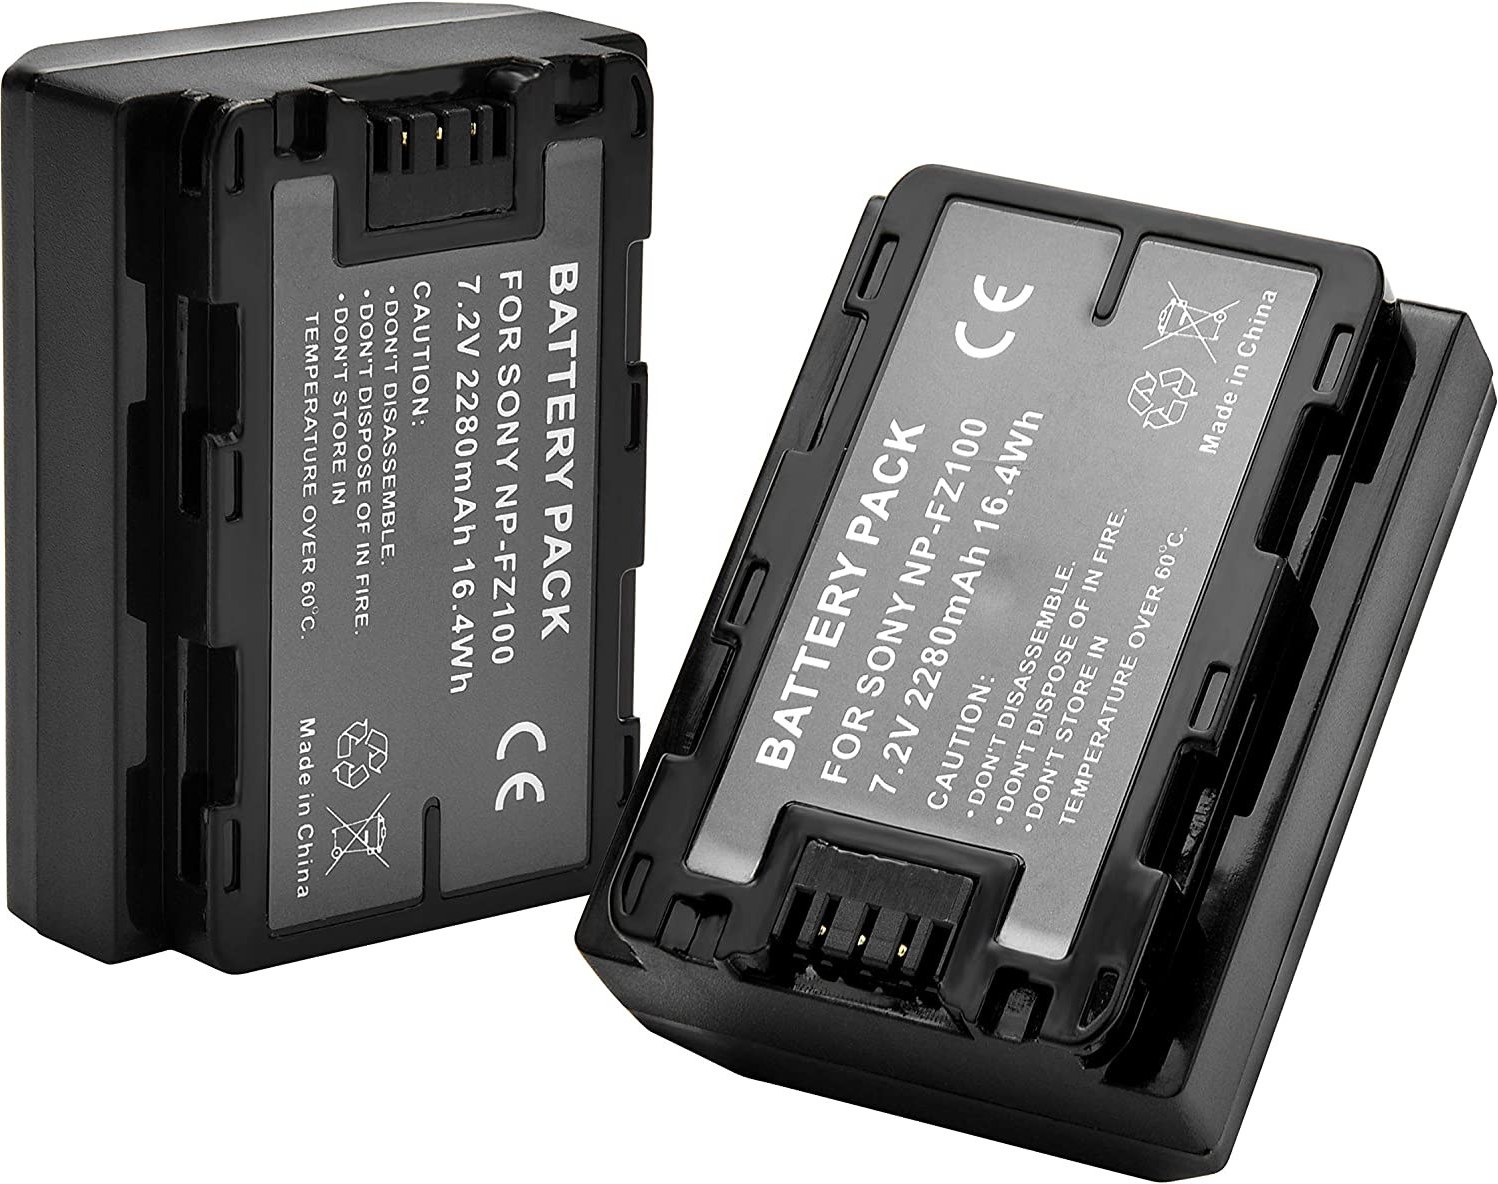 NP-FW50 Camera Battery Charger Set and 2-Pack 2250mAh Batteries for Sony  A6000, A6500, A6300, A7, A7II, A7RII, A7SII, A7S, A7R, A7R2, ZV-E10 Battery  